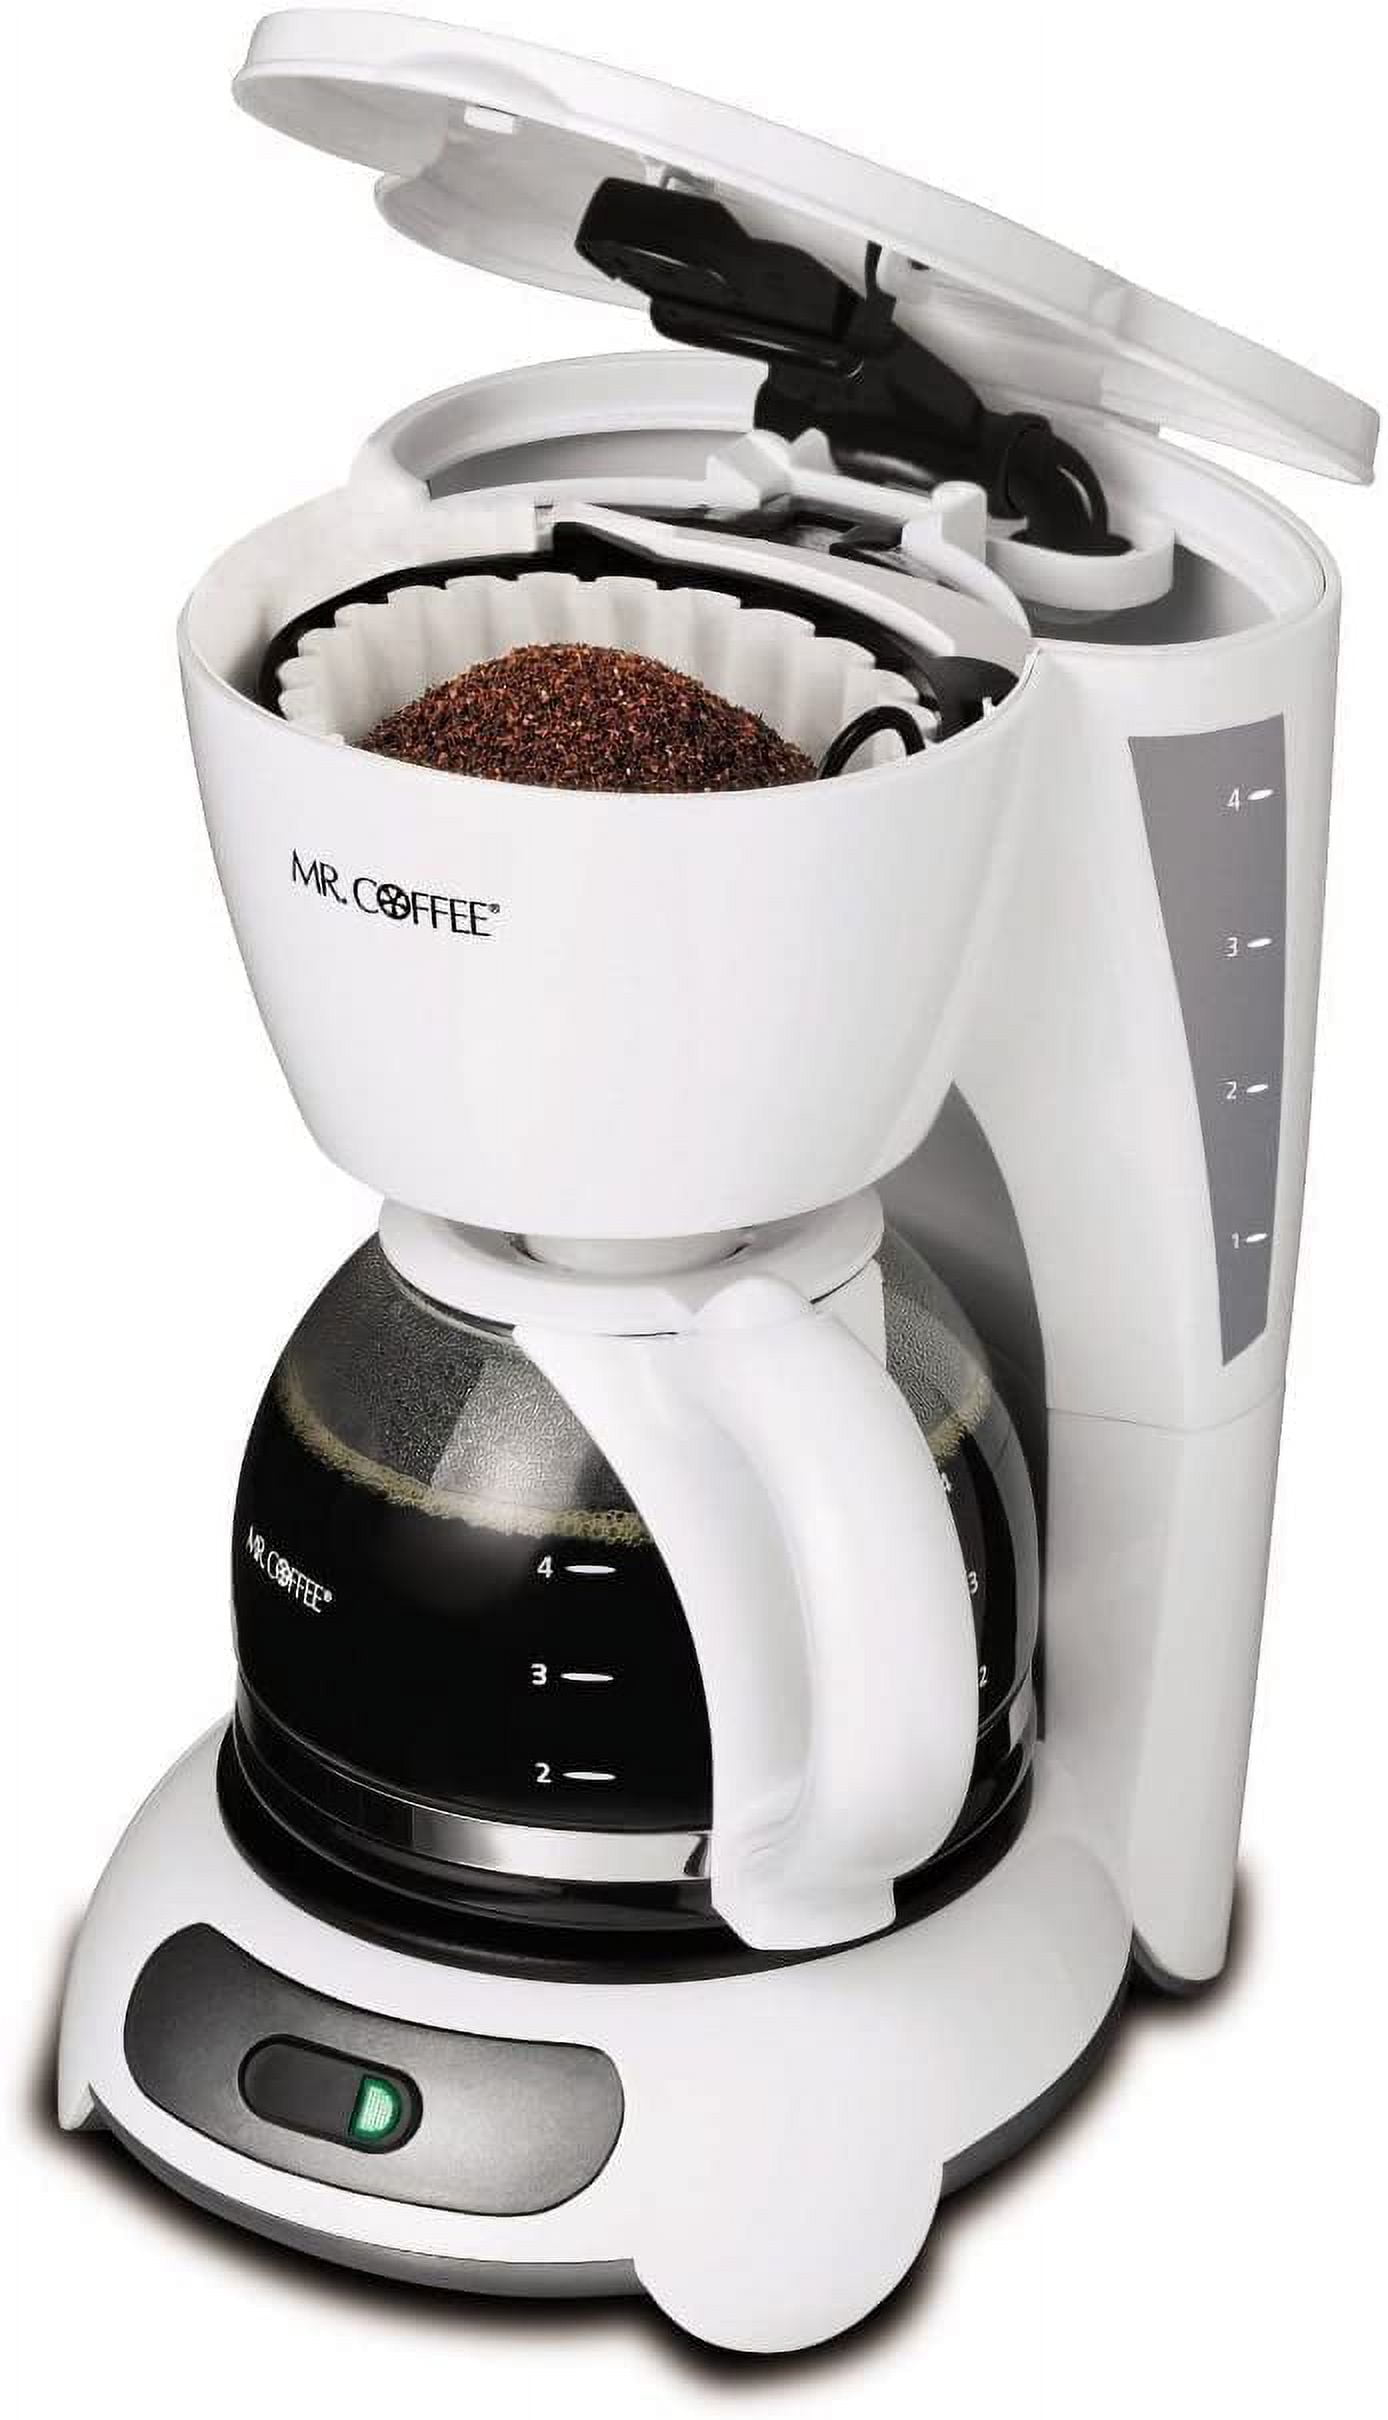 Mr Coffee 4 Cup Coffee Maker White AD4 Saves Space Small Compact